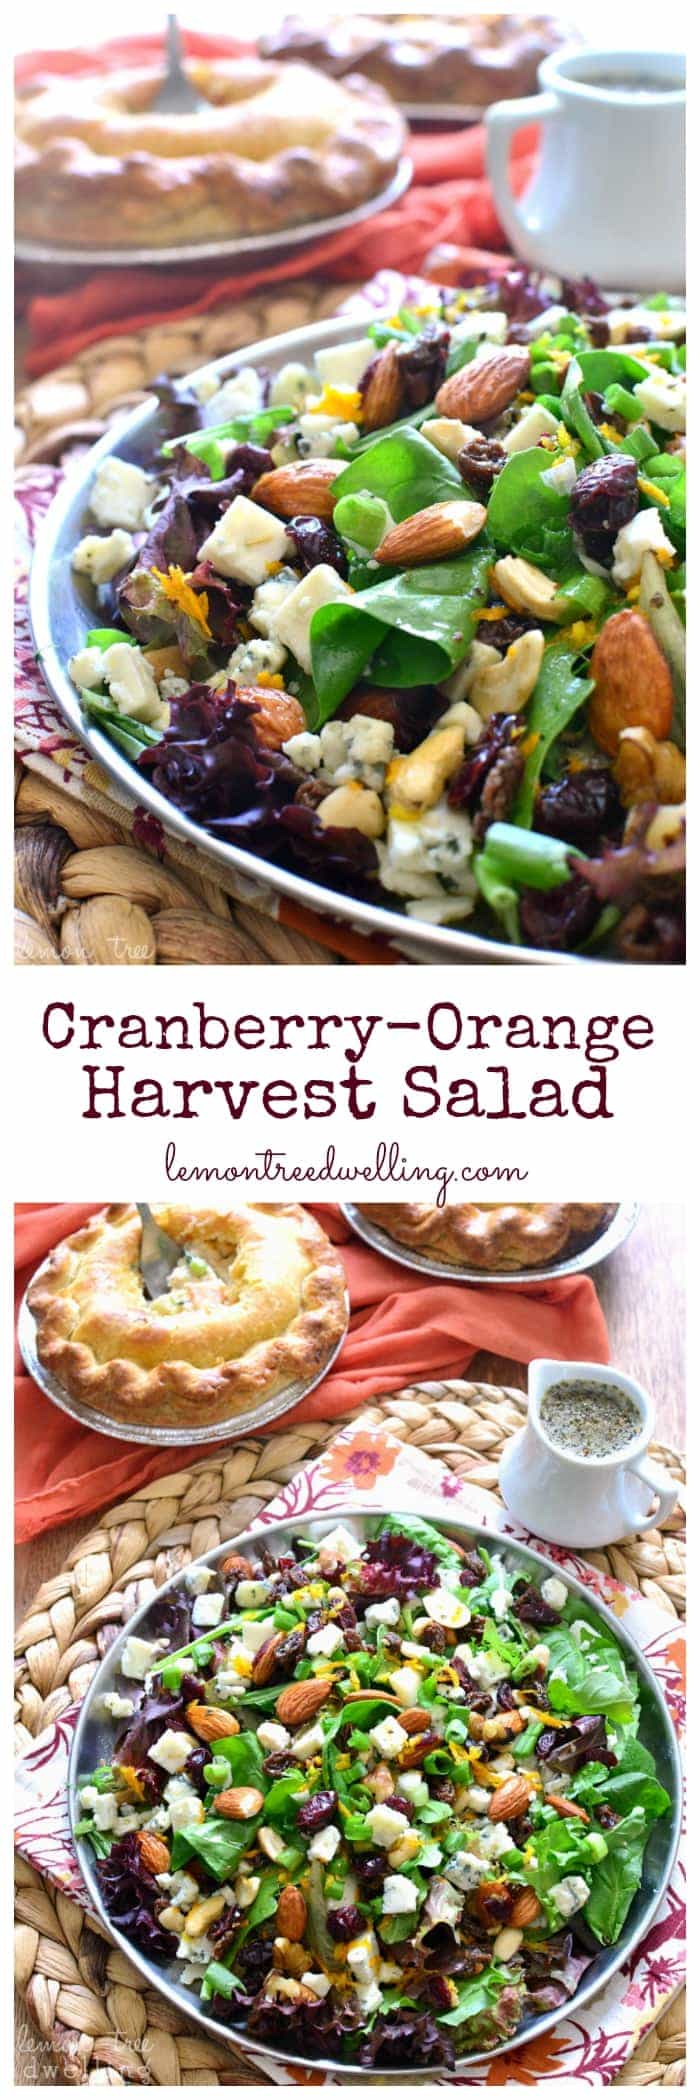 This Cranberry-Orange Harvest Salad combines mixed greens with dried fruit & nuts, gorgonzola cheese, and a zesty orange vinaigrette. It's packed with flavor, perfect for fall, and delicious served with Pick 'n Save Pot Pies! #mypicknsave #spon